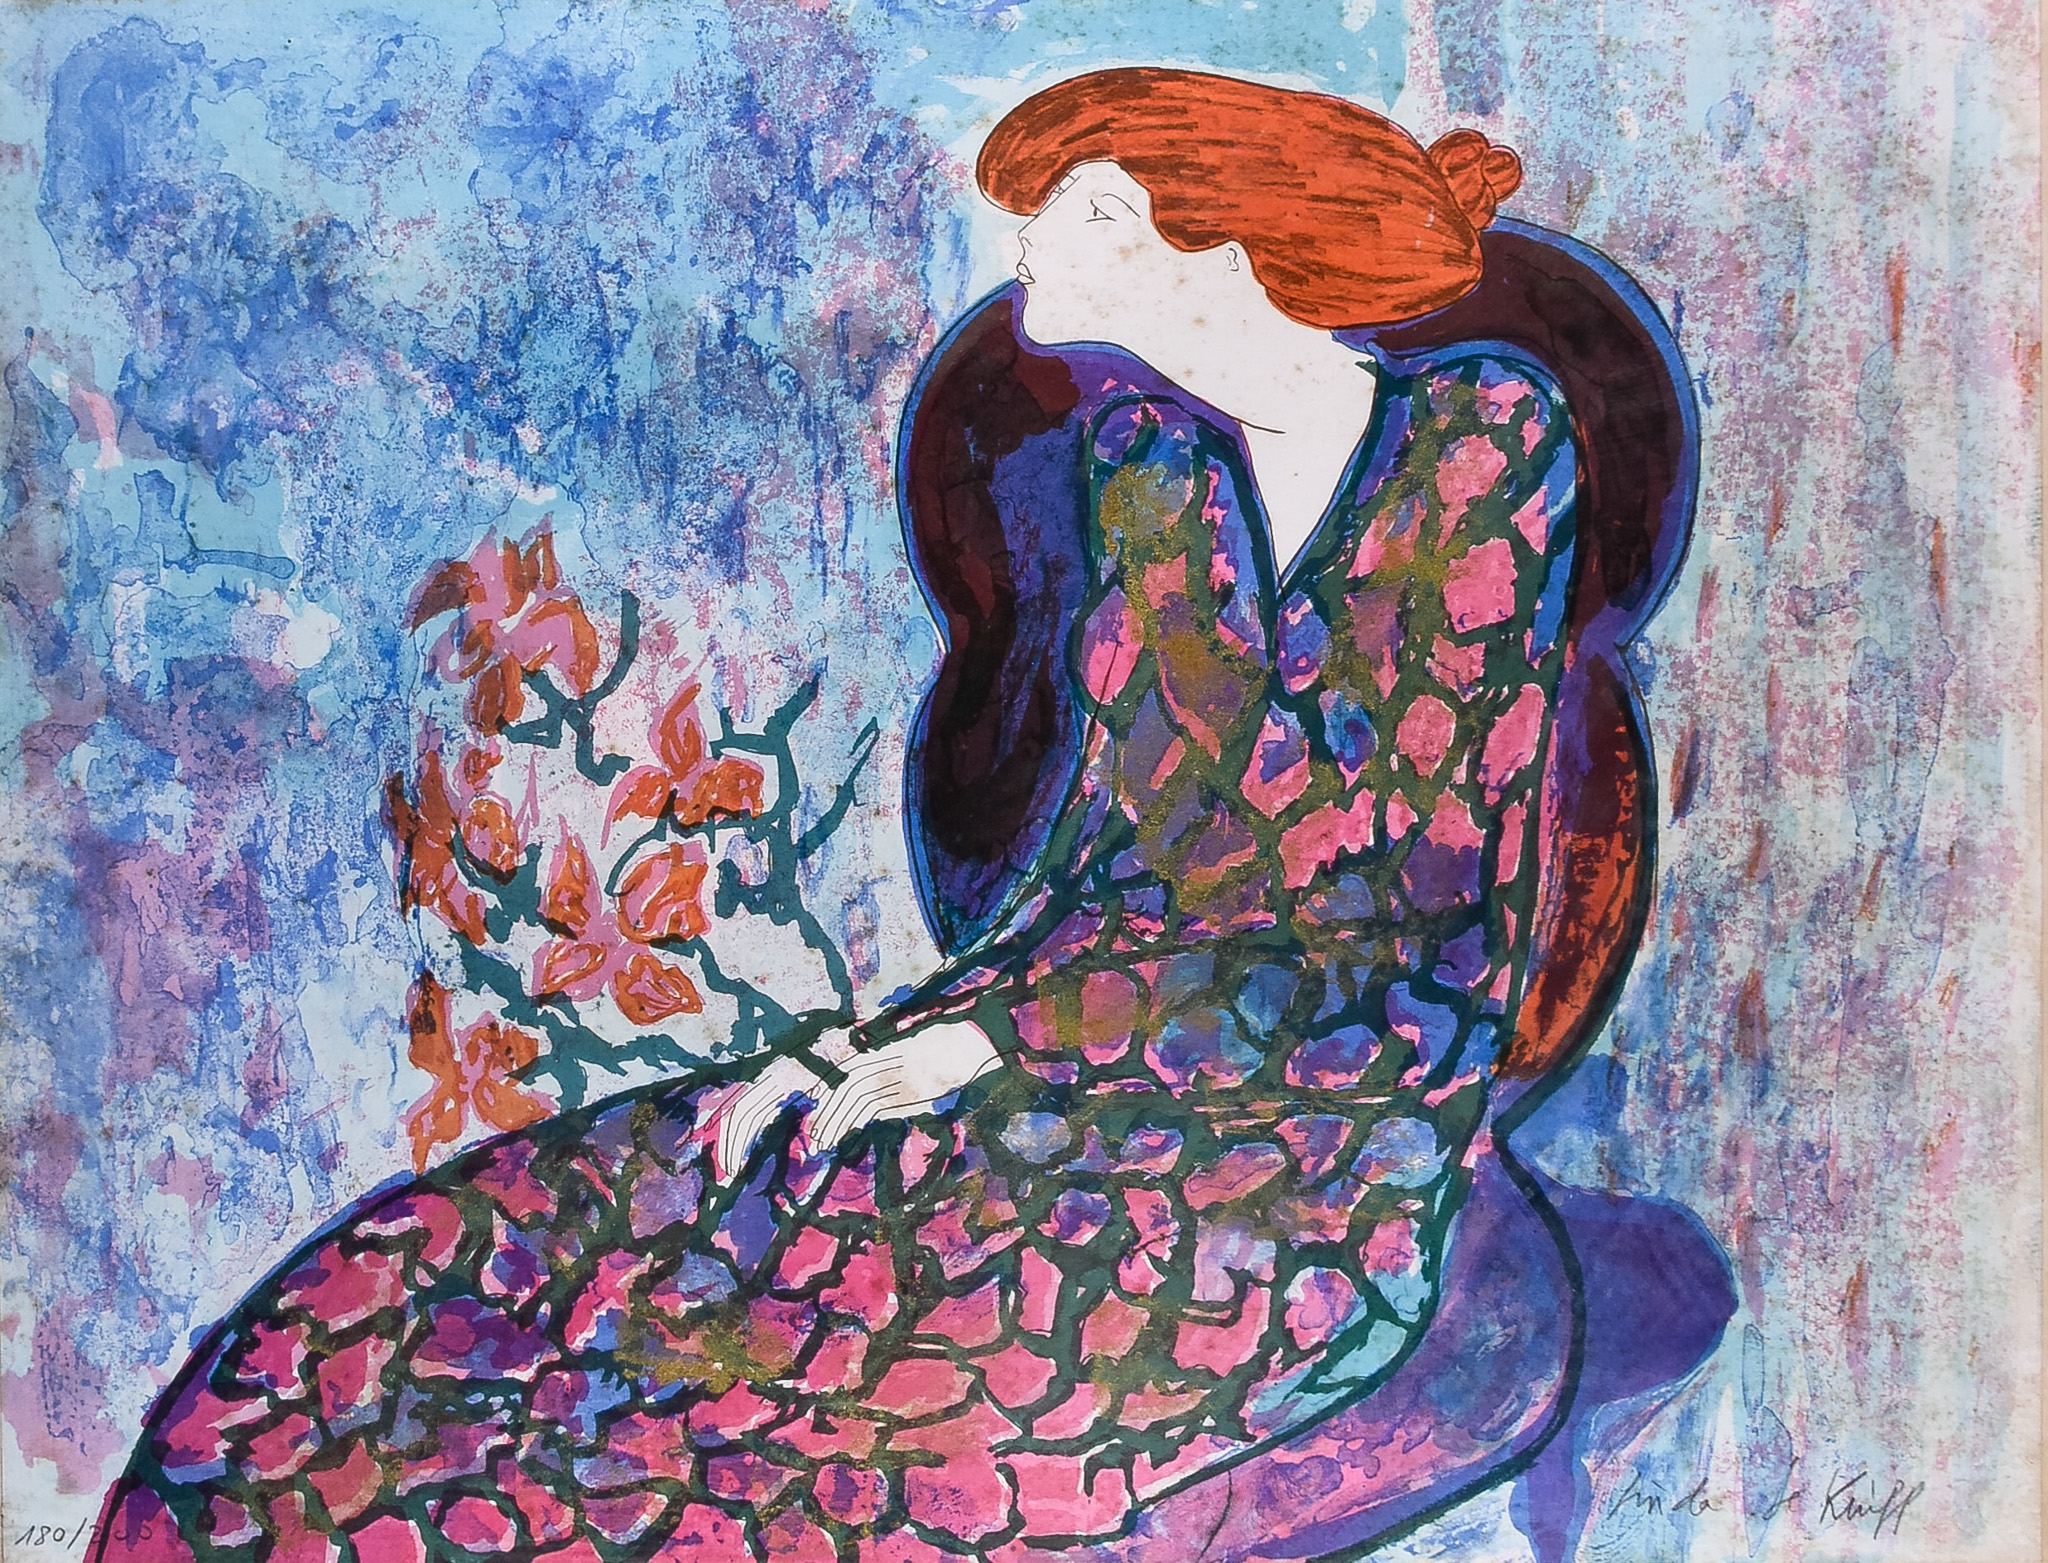 Linda La Kinff (Born 1949) - Two Limited Edition Seriographs in Colours, one of an Art Nouveau style - Image 2 of 2